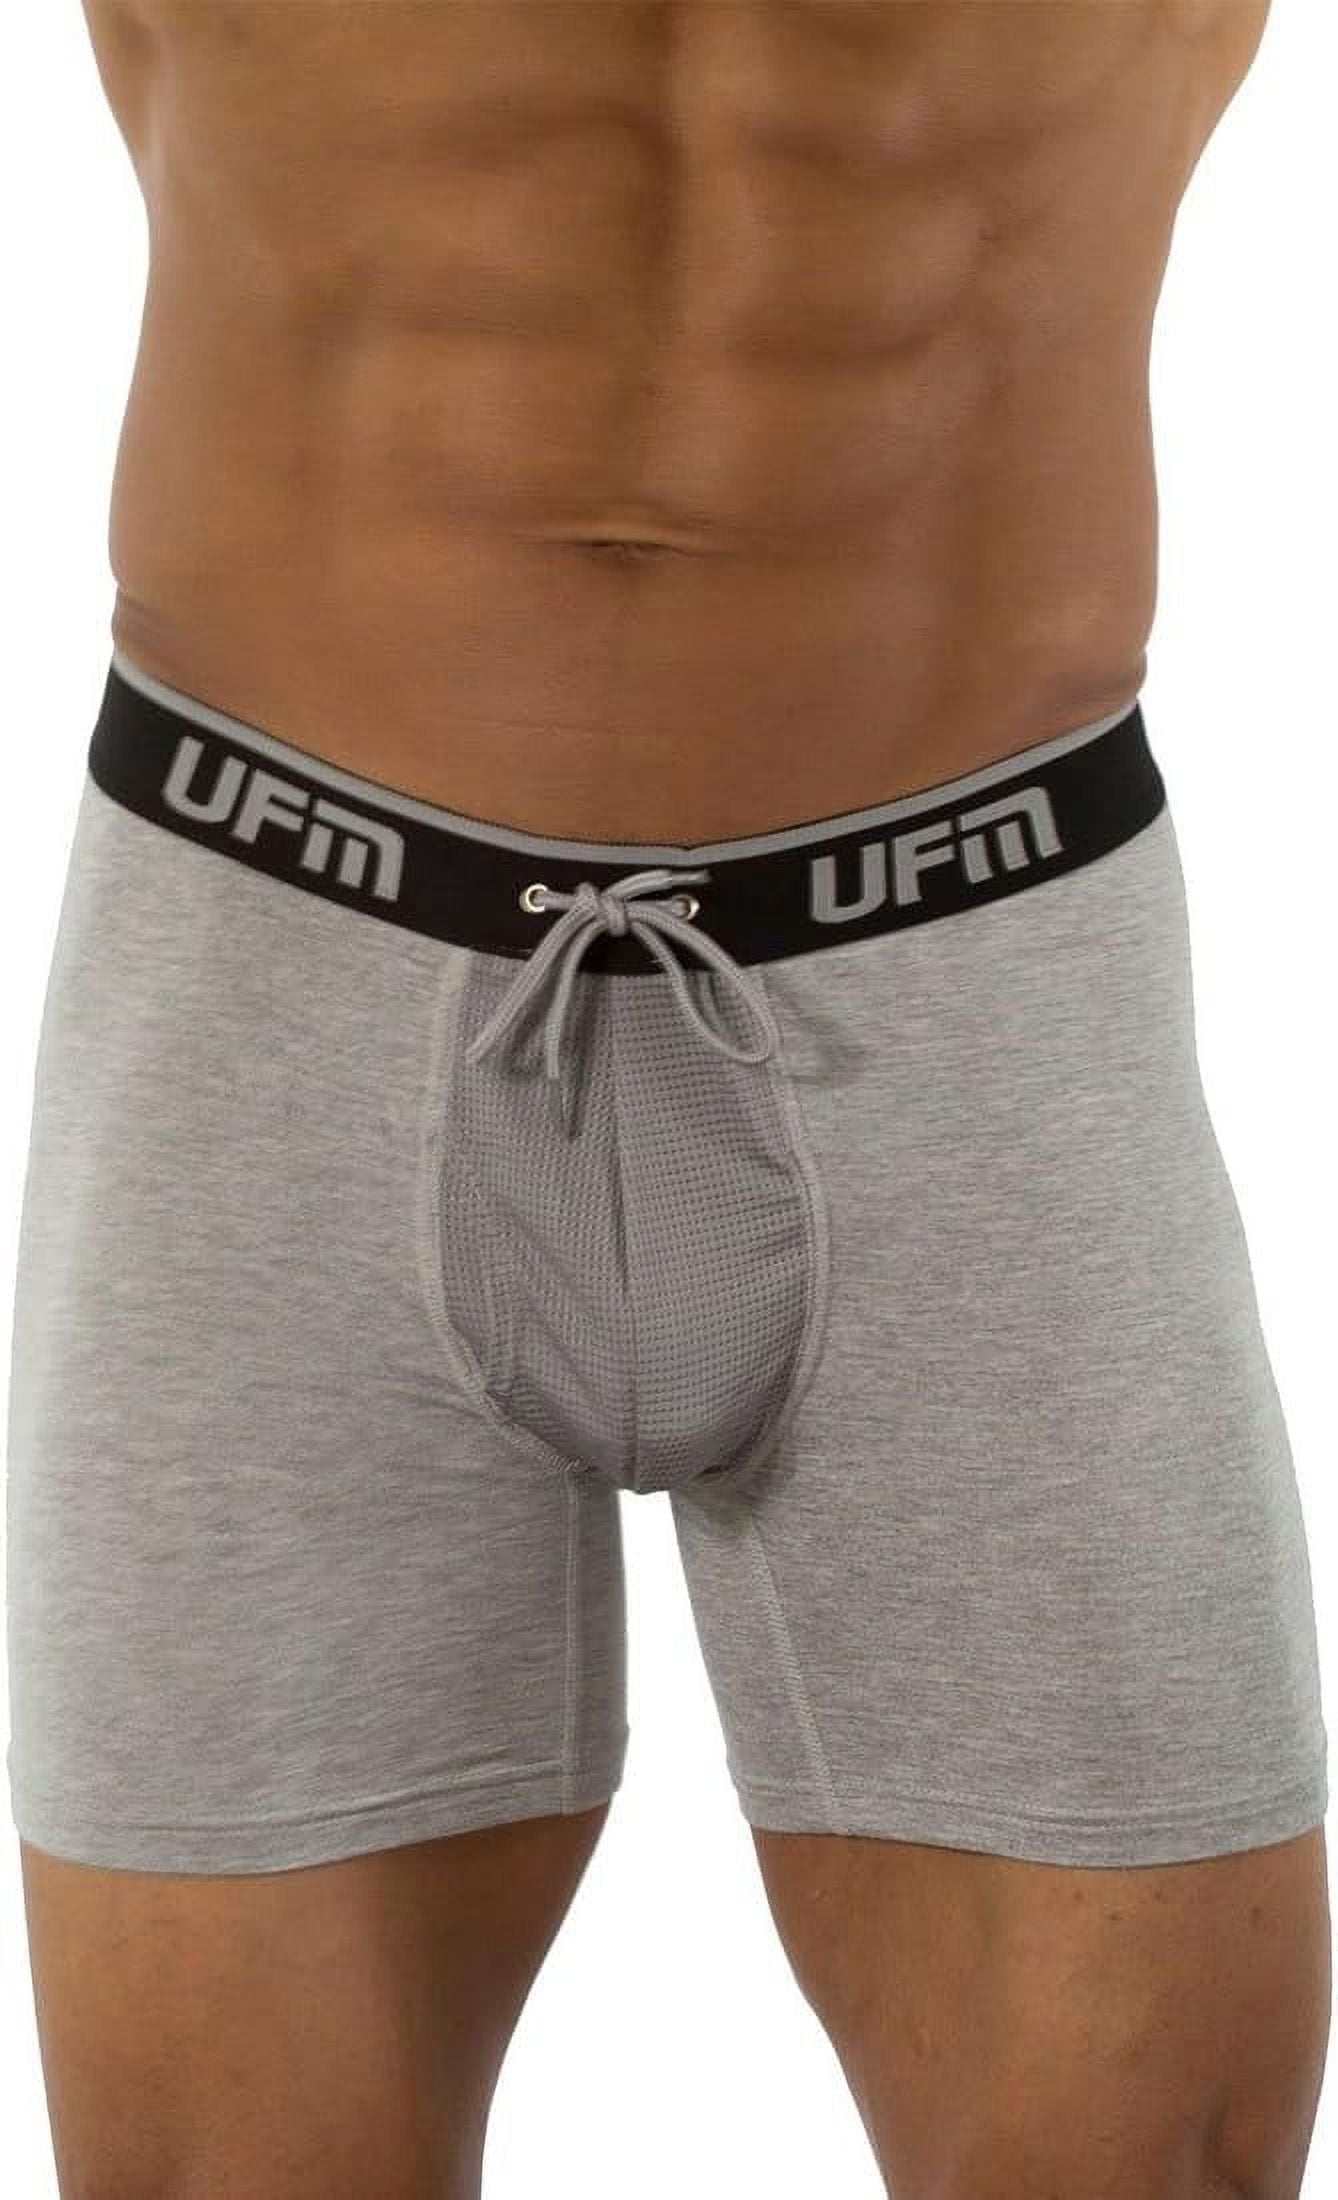 UFM Mens Bamboo Boxer Brief w/Patented Adjustable Support Pouch